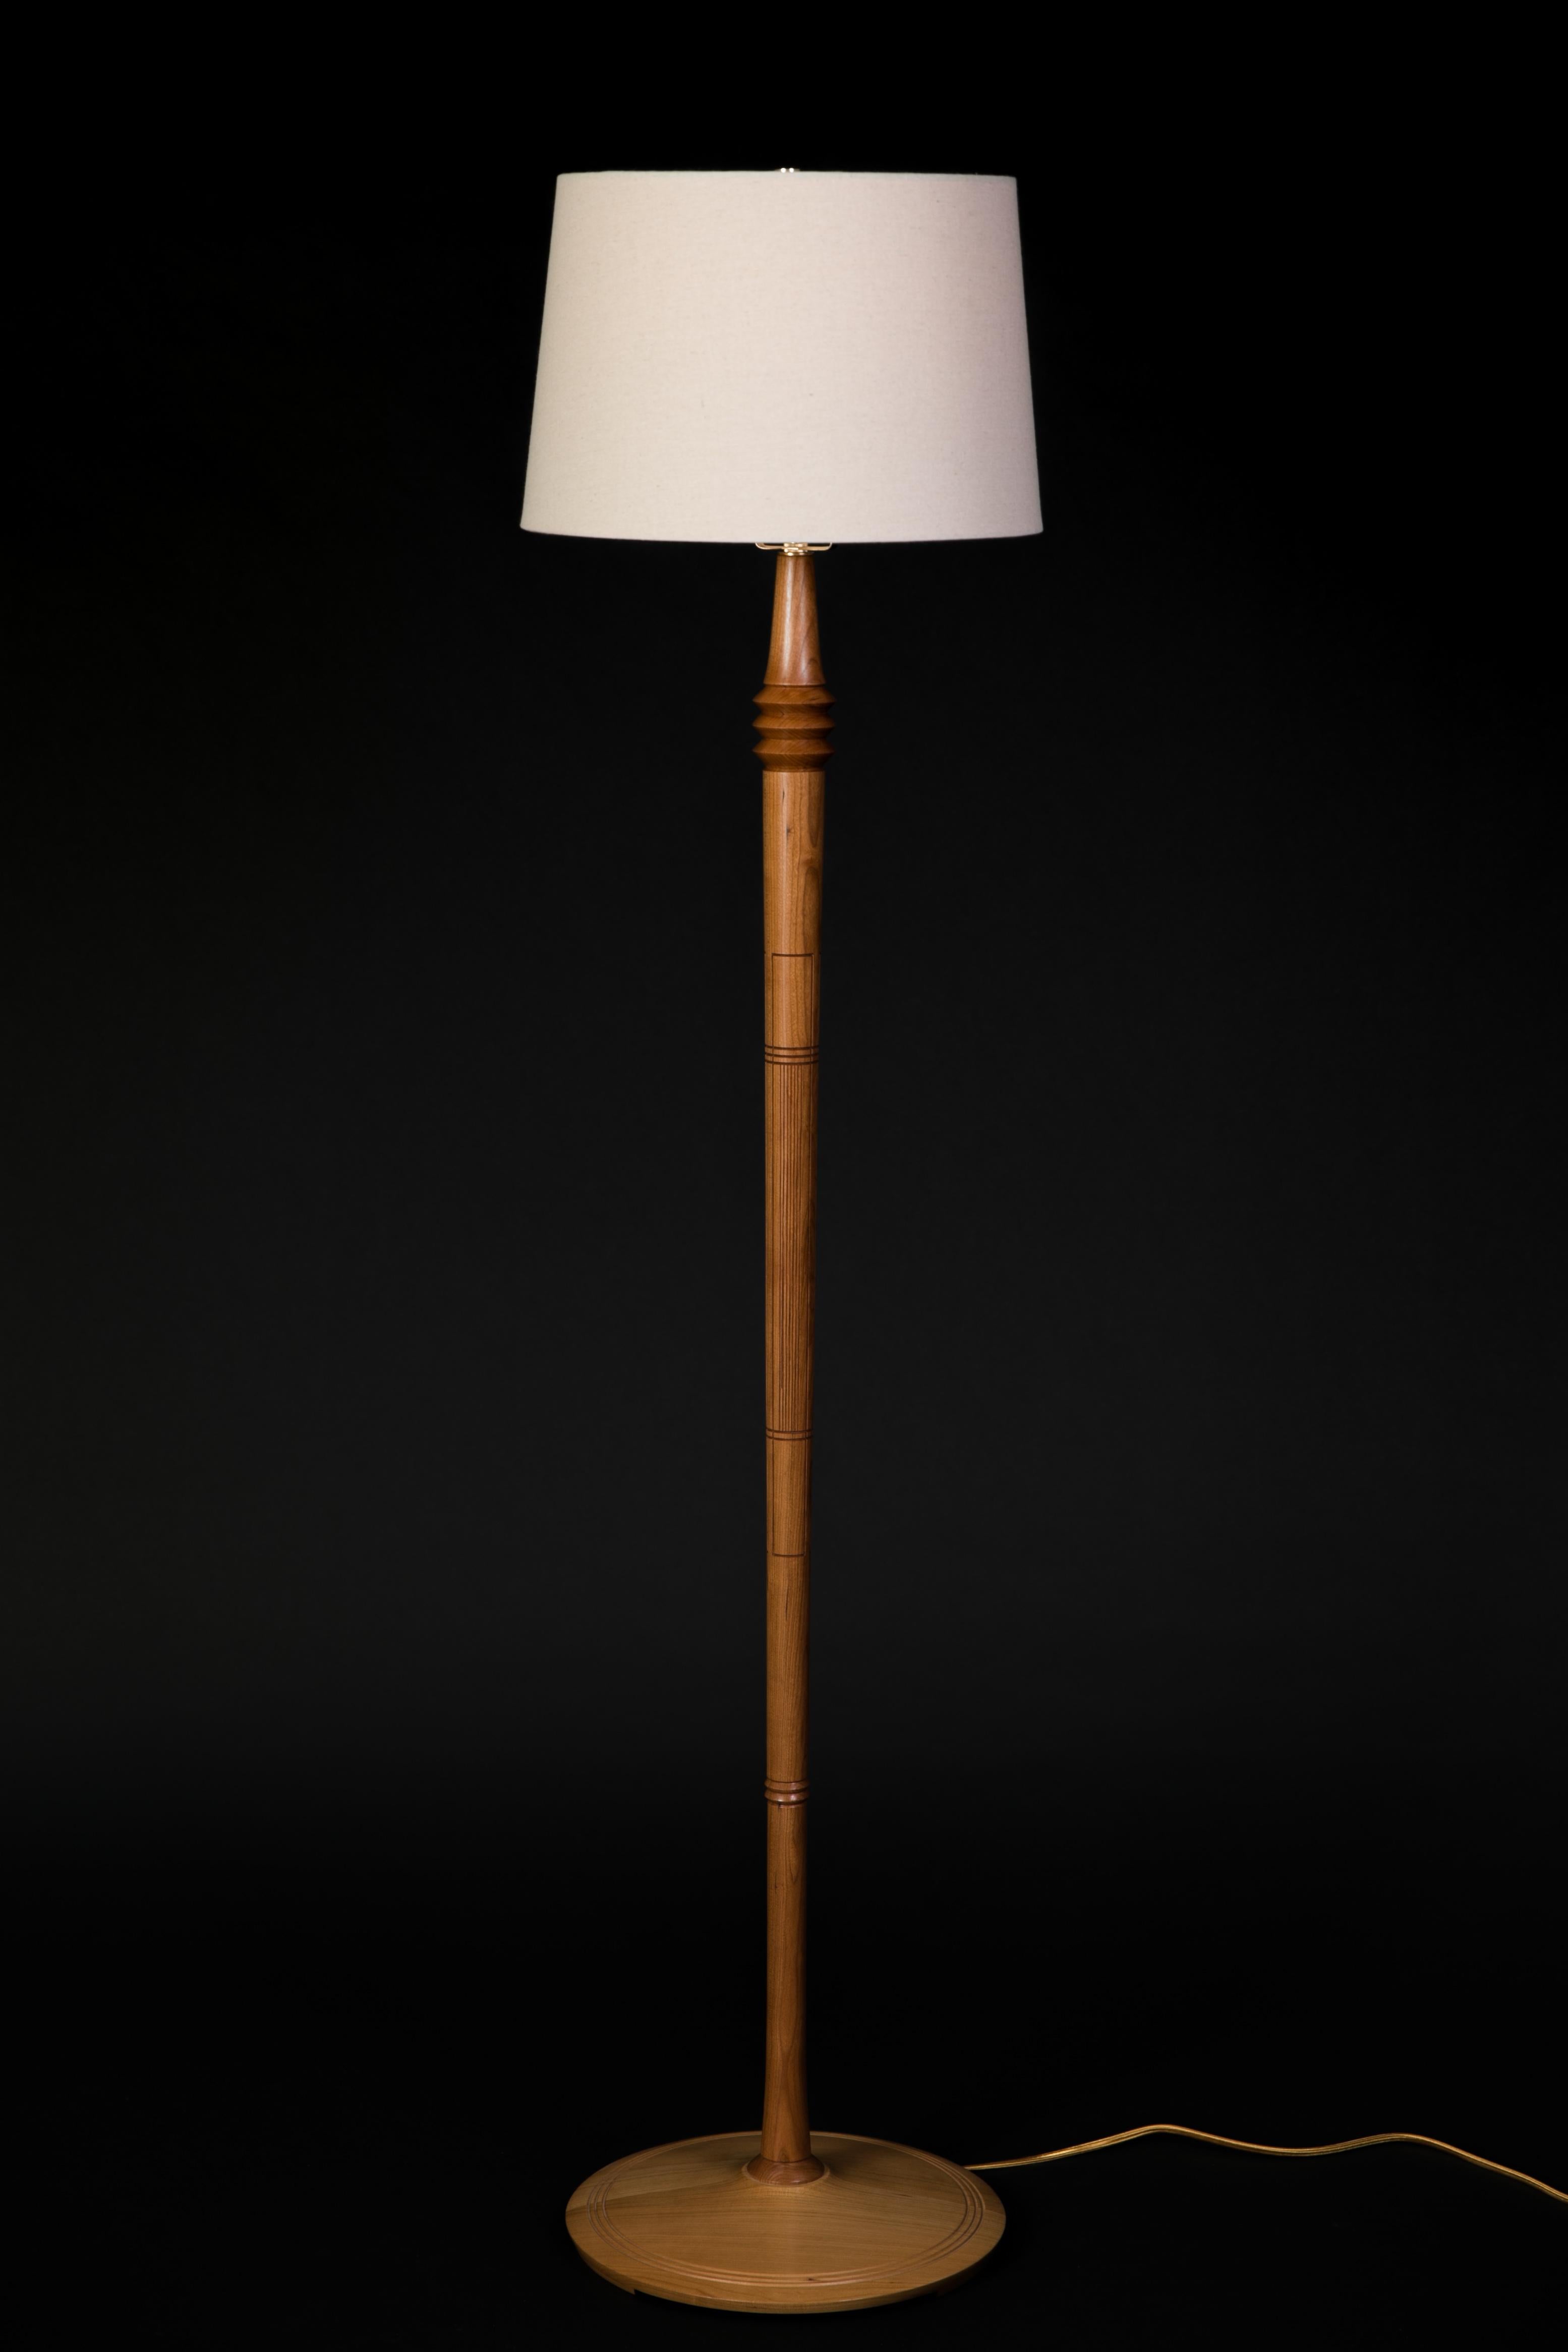 Starting with a basic form similar to another lamp in my collection, this lamp includes detail work that requires time and patience. While a lamp has a basic function of proving light, the details of this lamp add a playful element to the otherwise